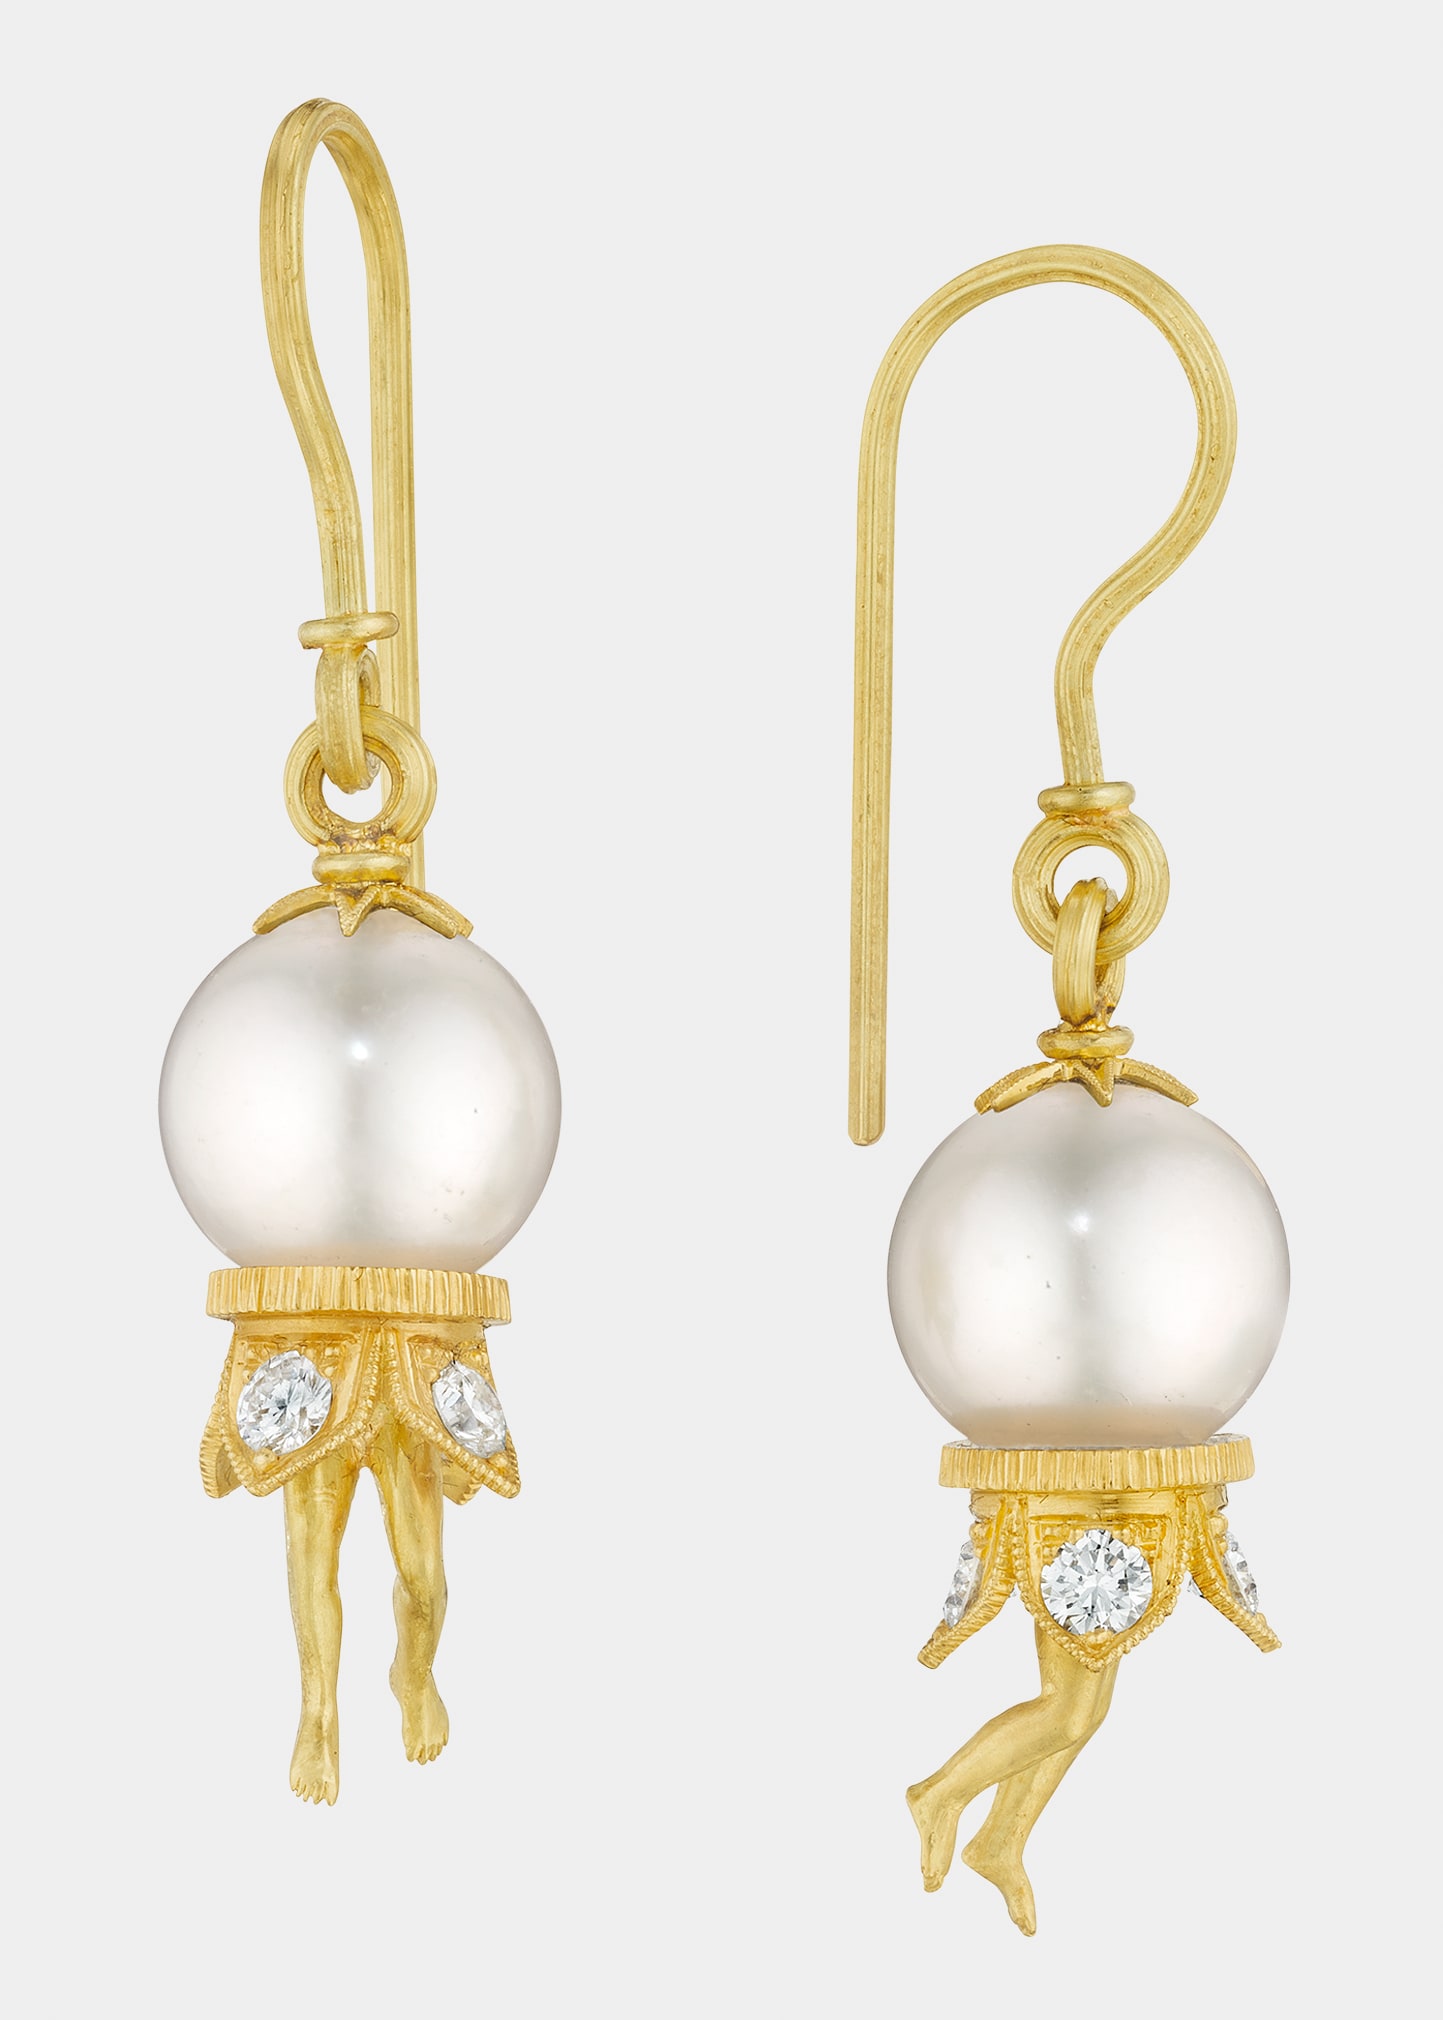 Anthony Lent Bosch Pearl Earrings In 18k Gold With Diamonds In Yg